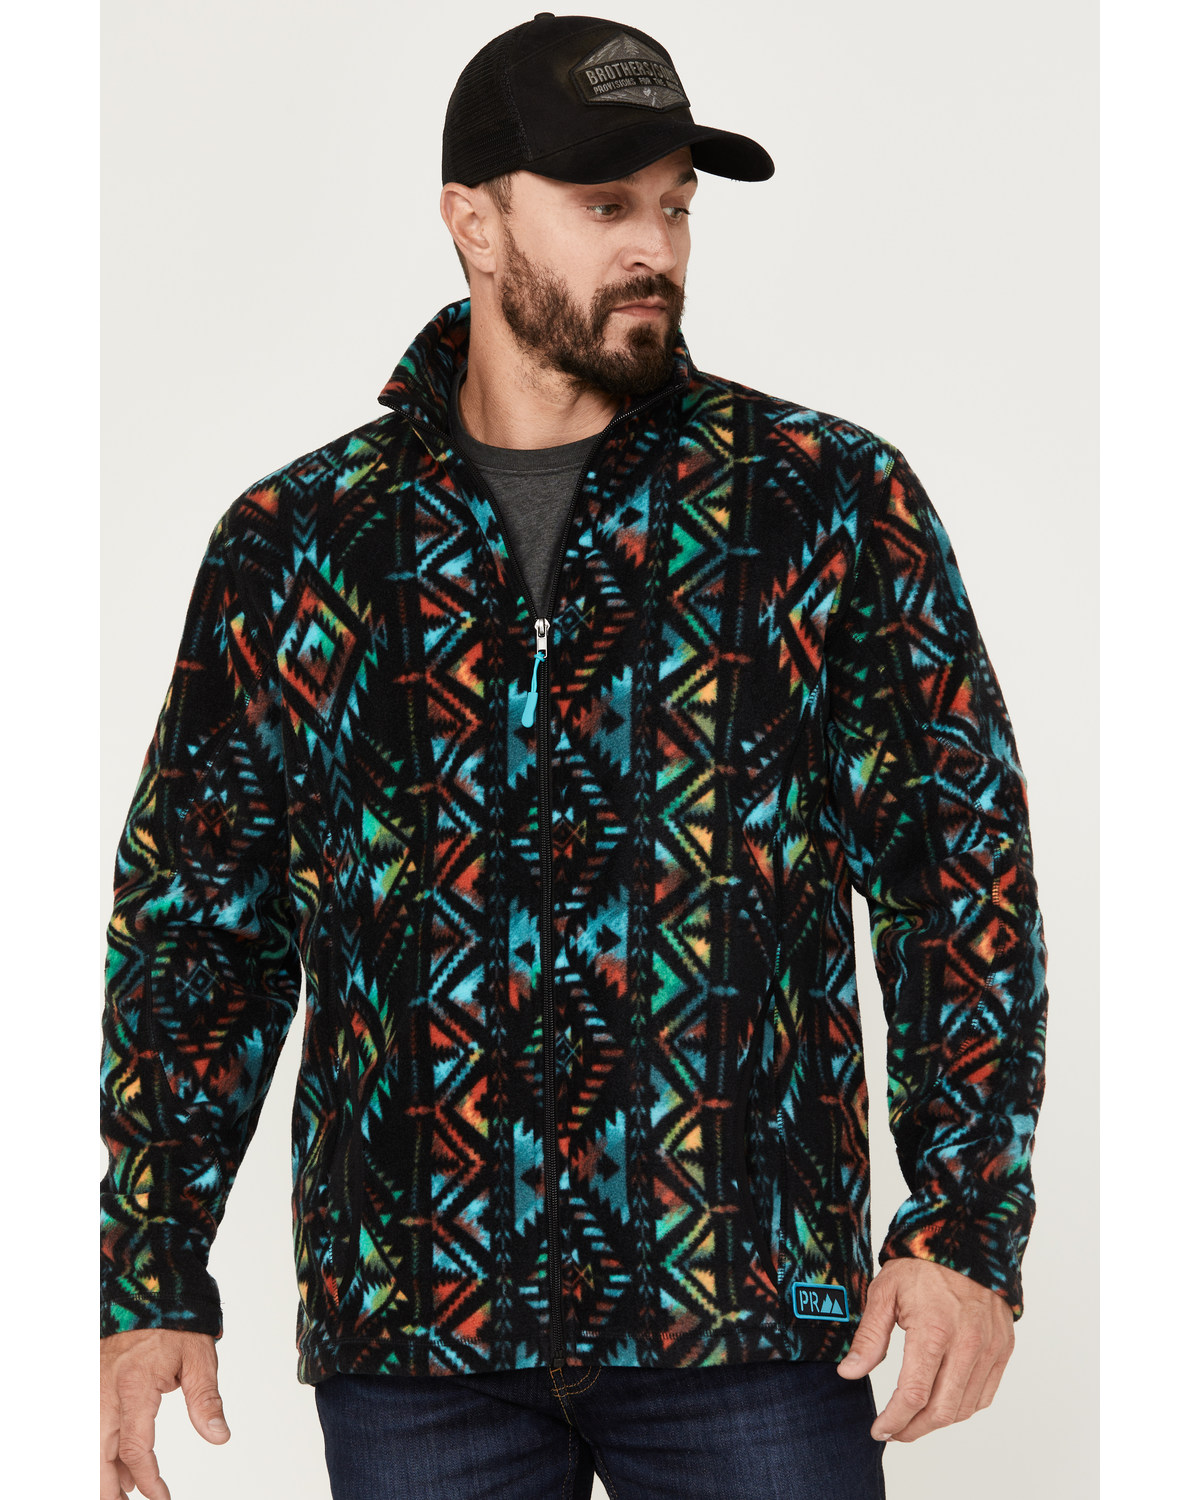 Powder River Outfitters Men's Southwestern Print Fleece Pullover